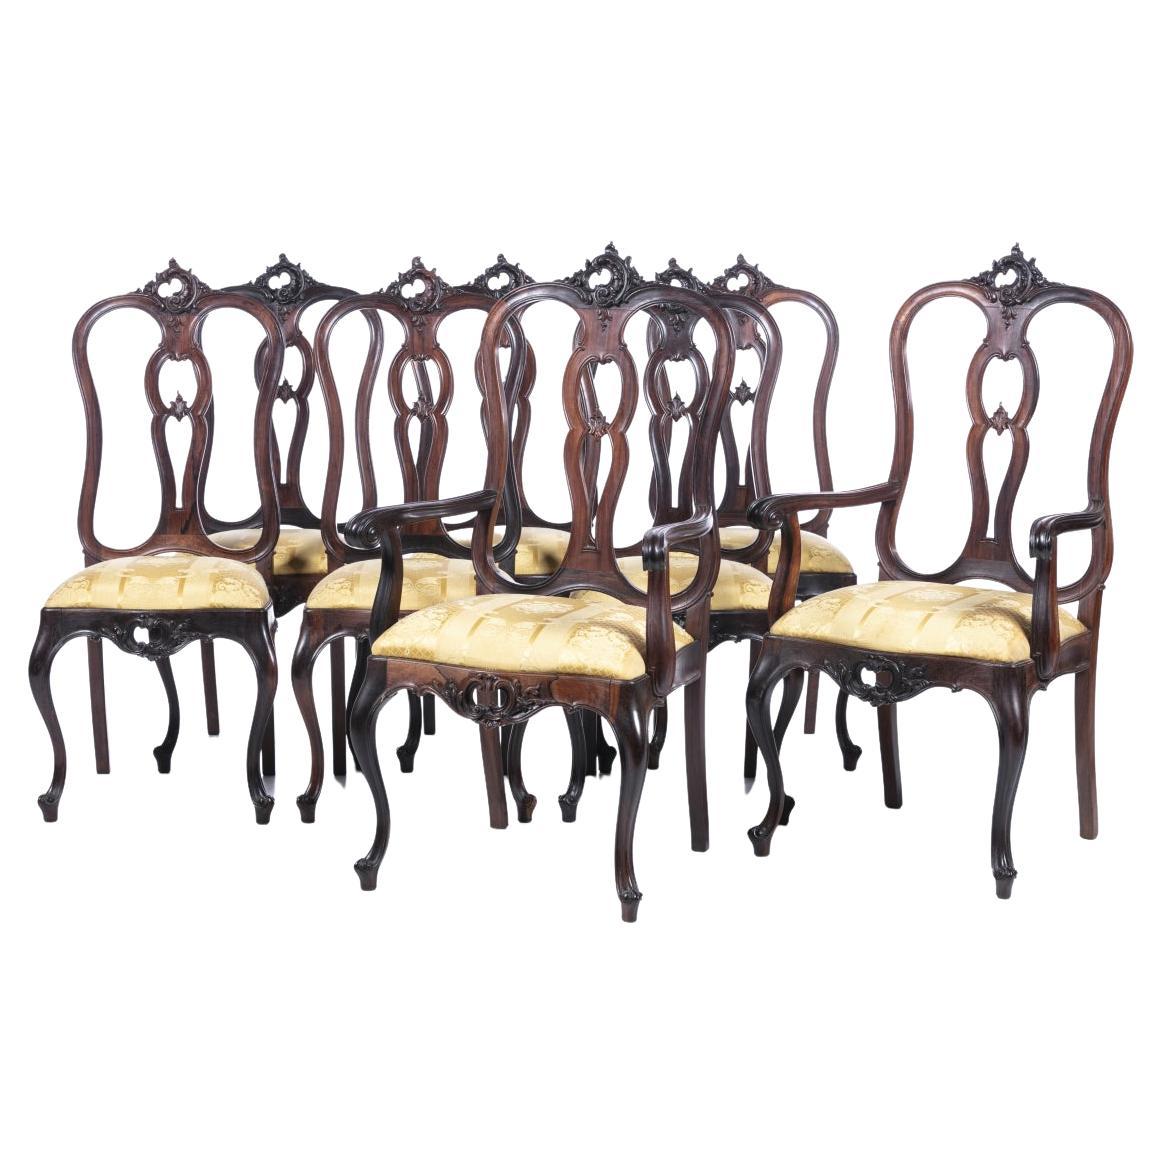 Set of 6 Chairs and 2 Armchairs 19th Century